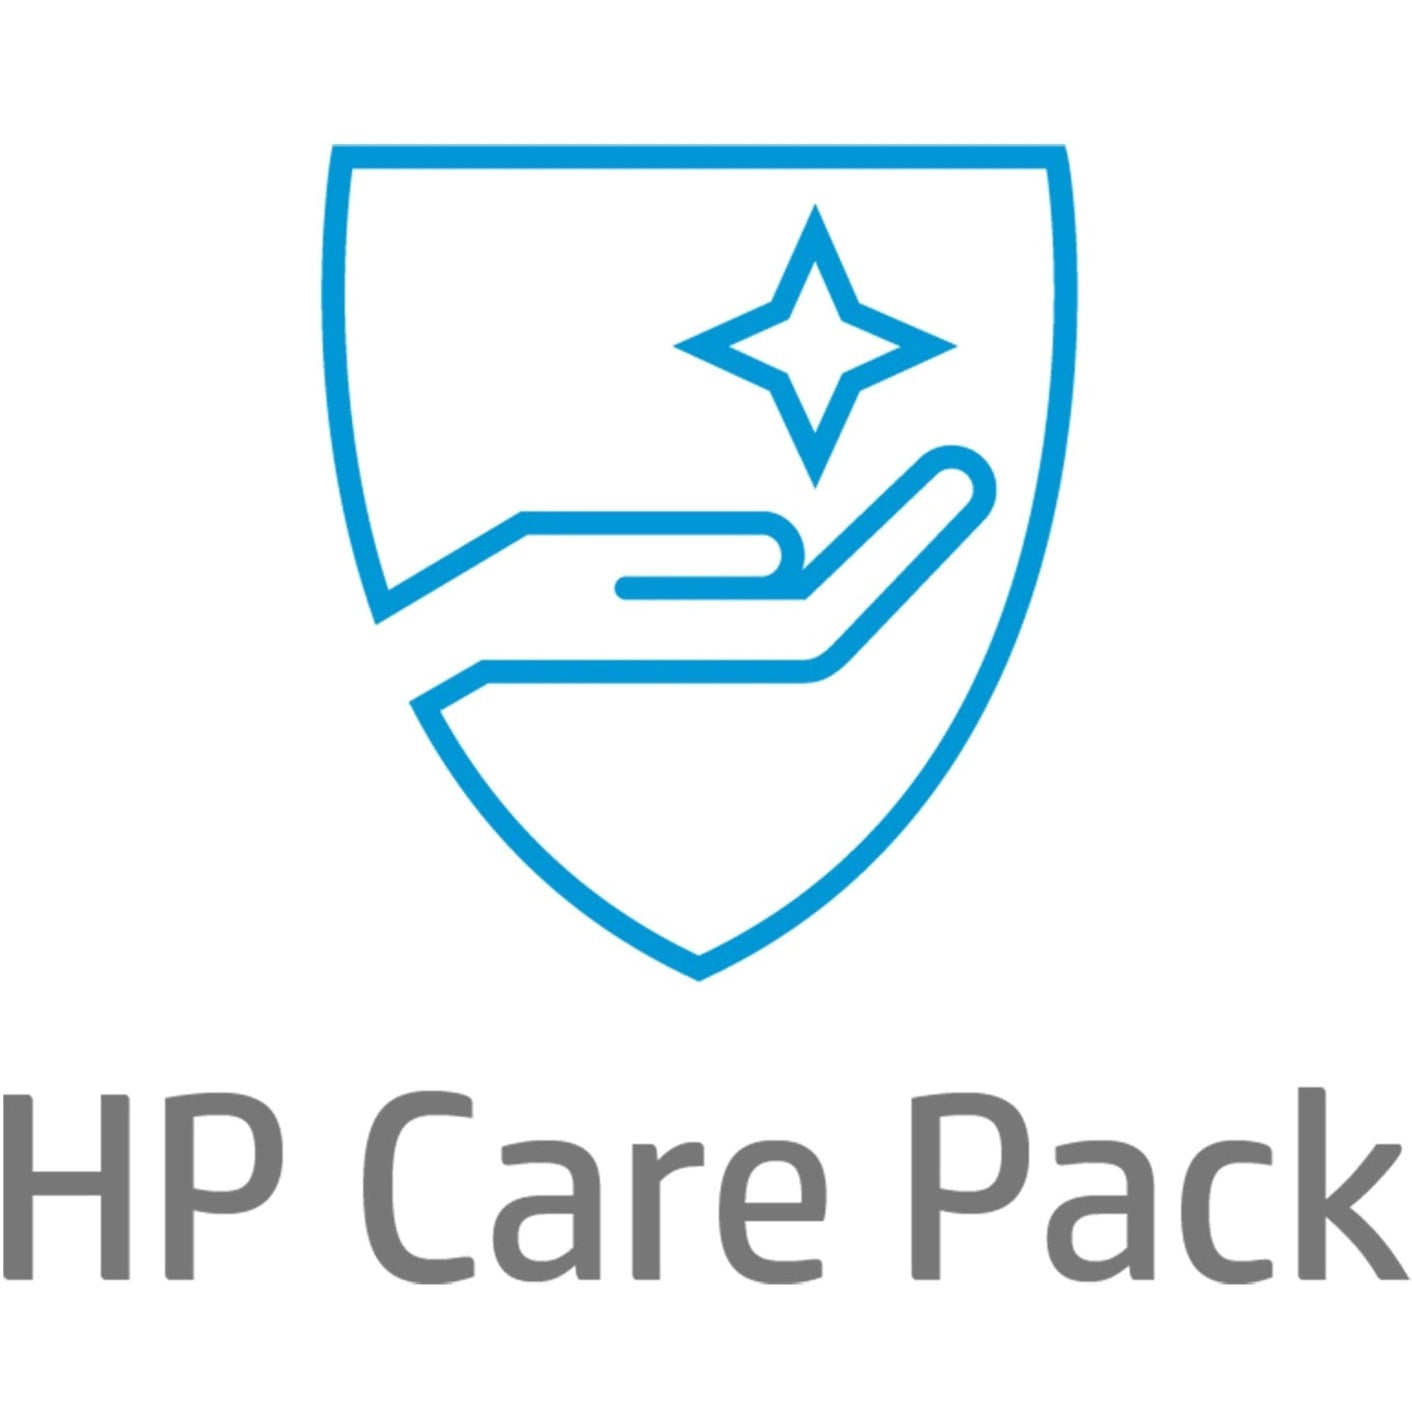 HP Care Pack - Extended Service - 2 Year - Service (UK727E)